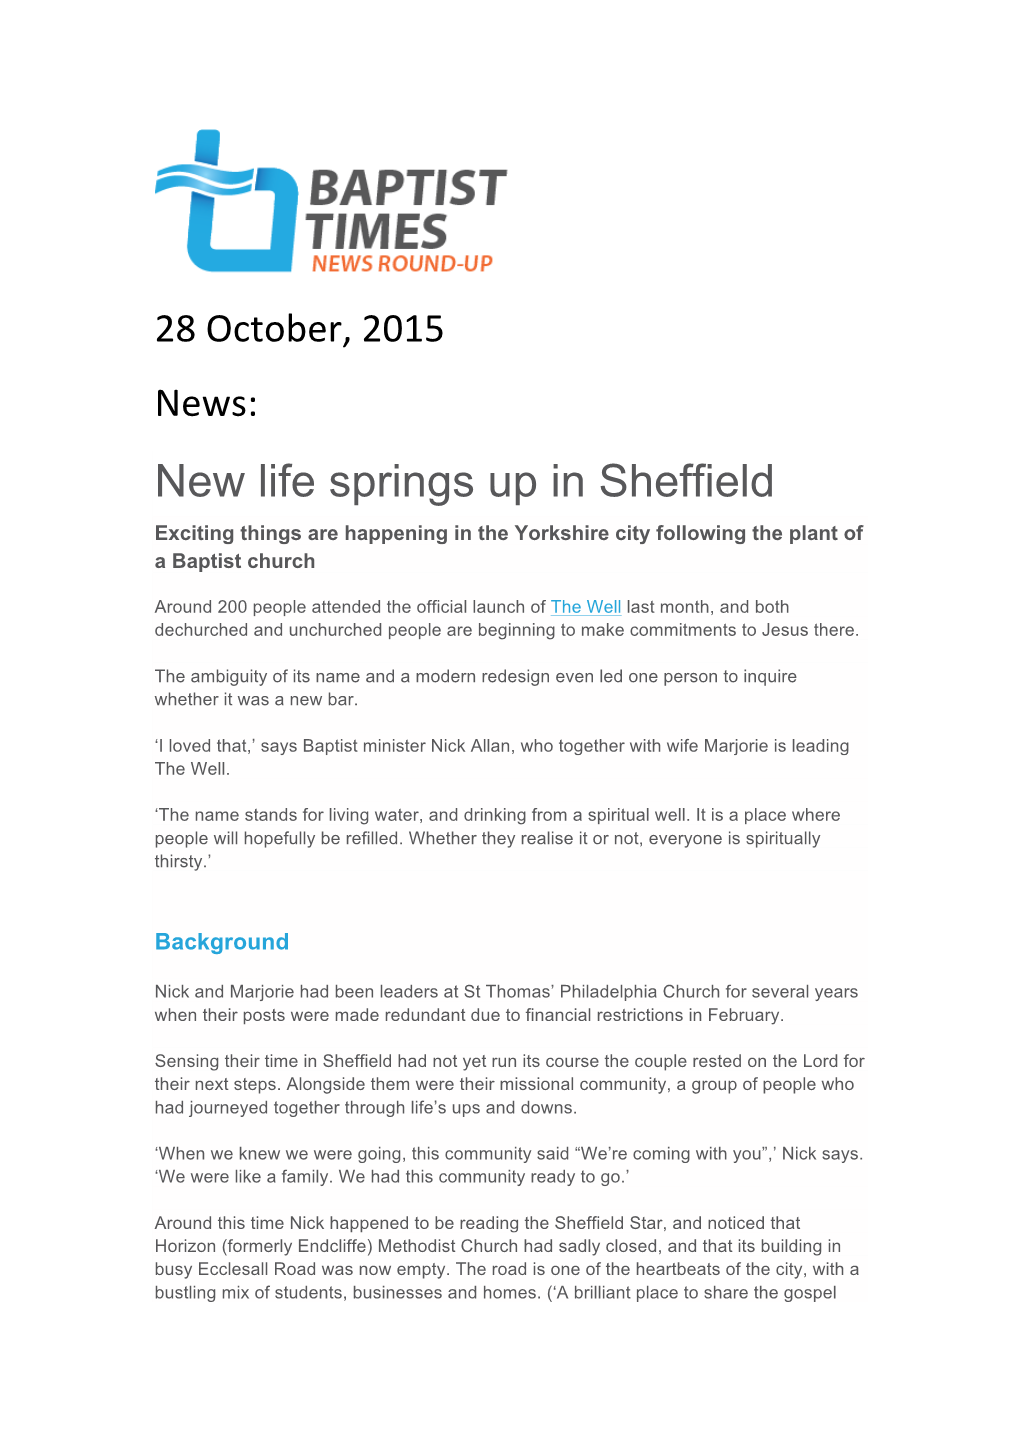 New Life Springs up in Sheffield Exciting Things Are Happening in the Yorkshire City Following the Plant of a Baptist Church